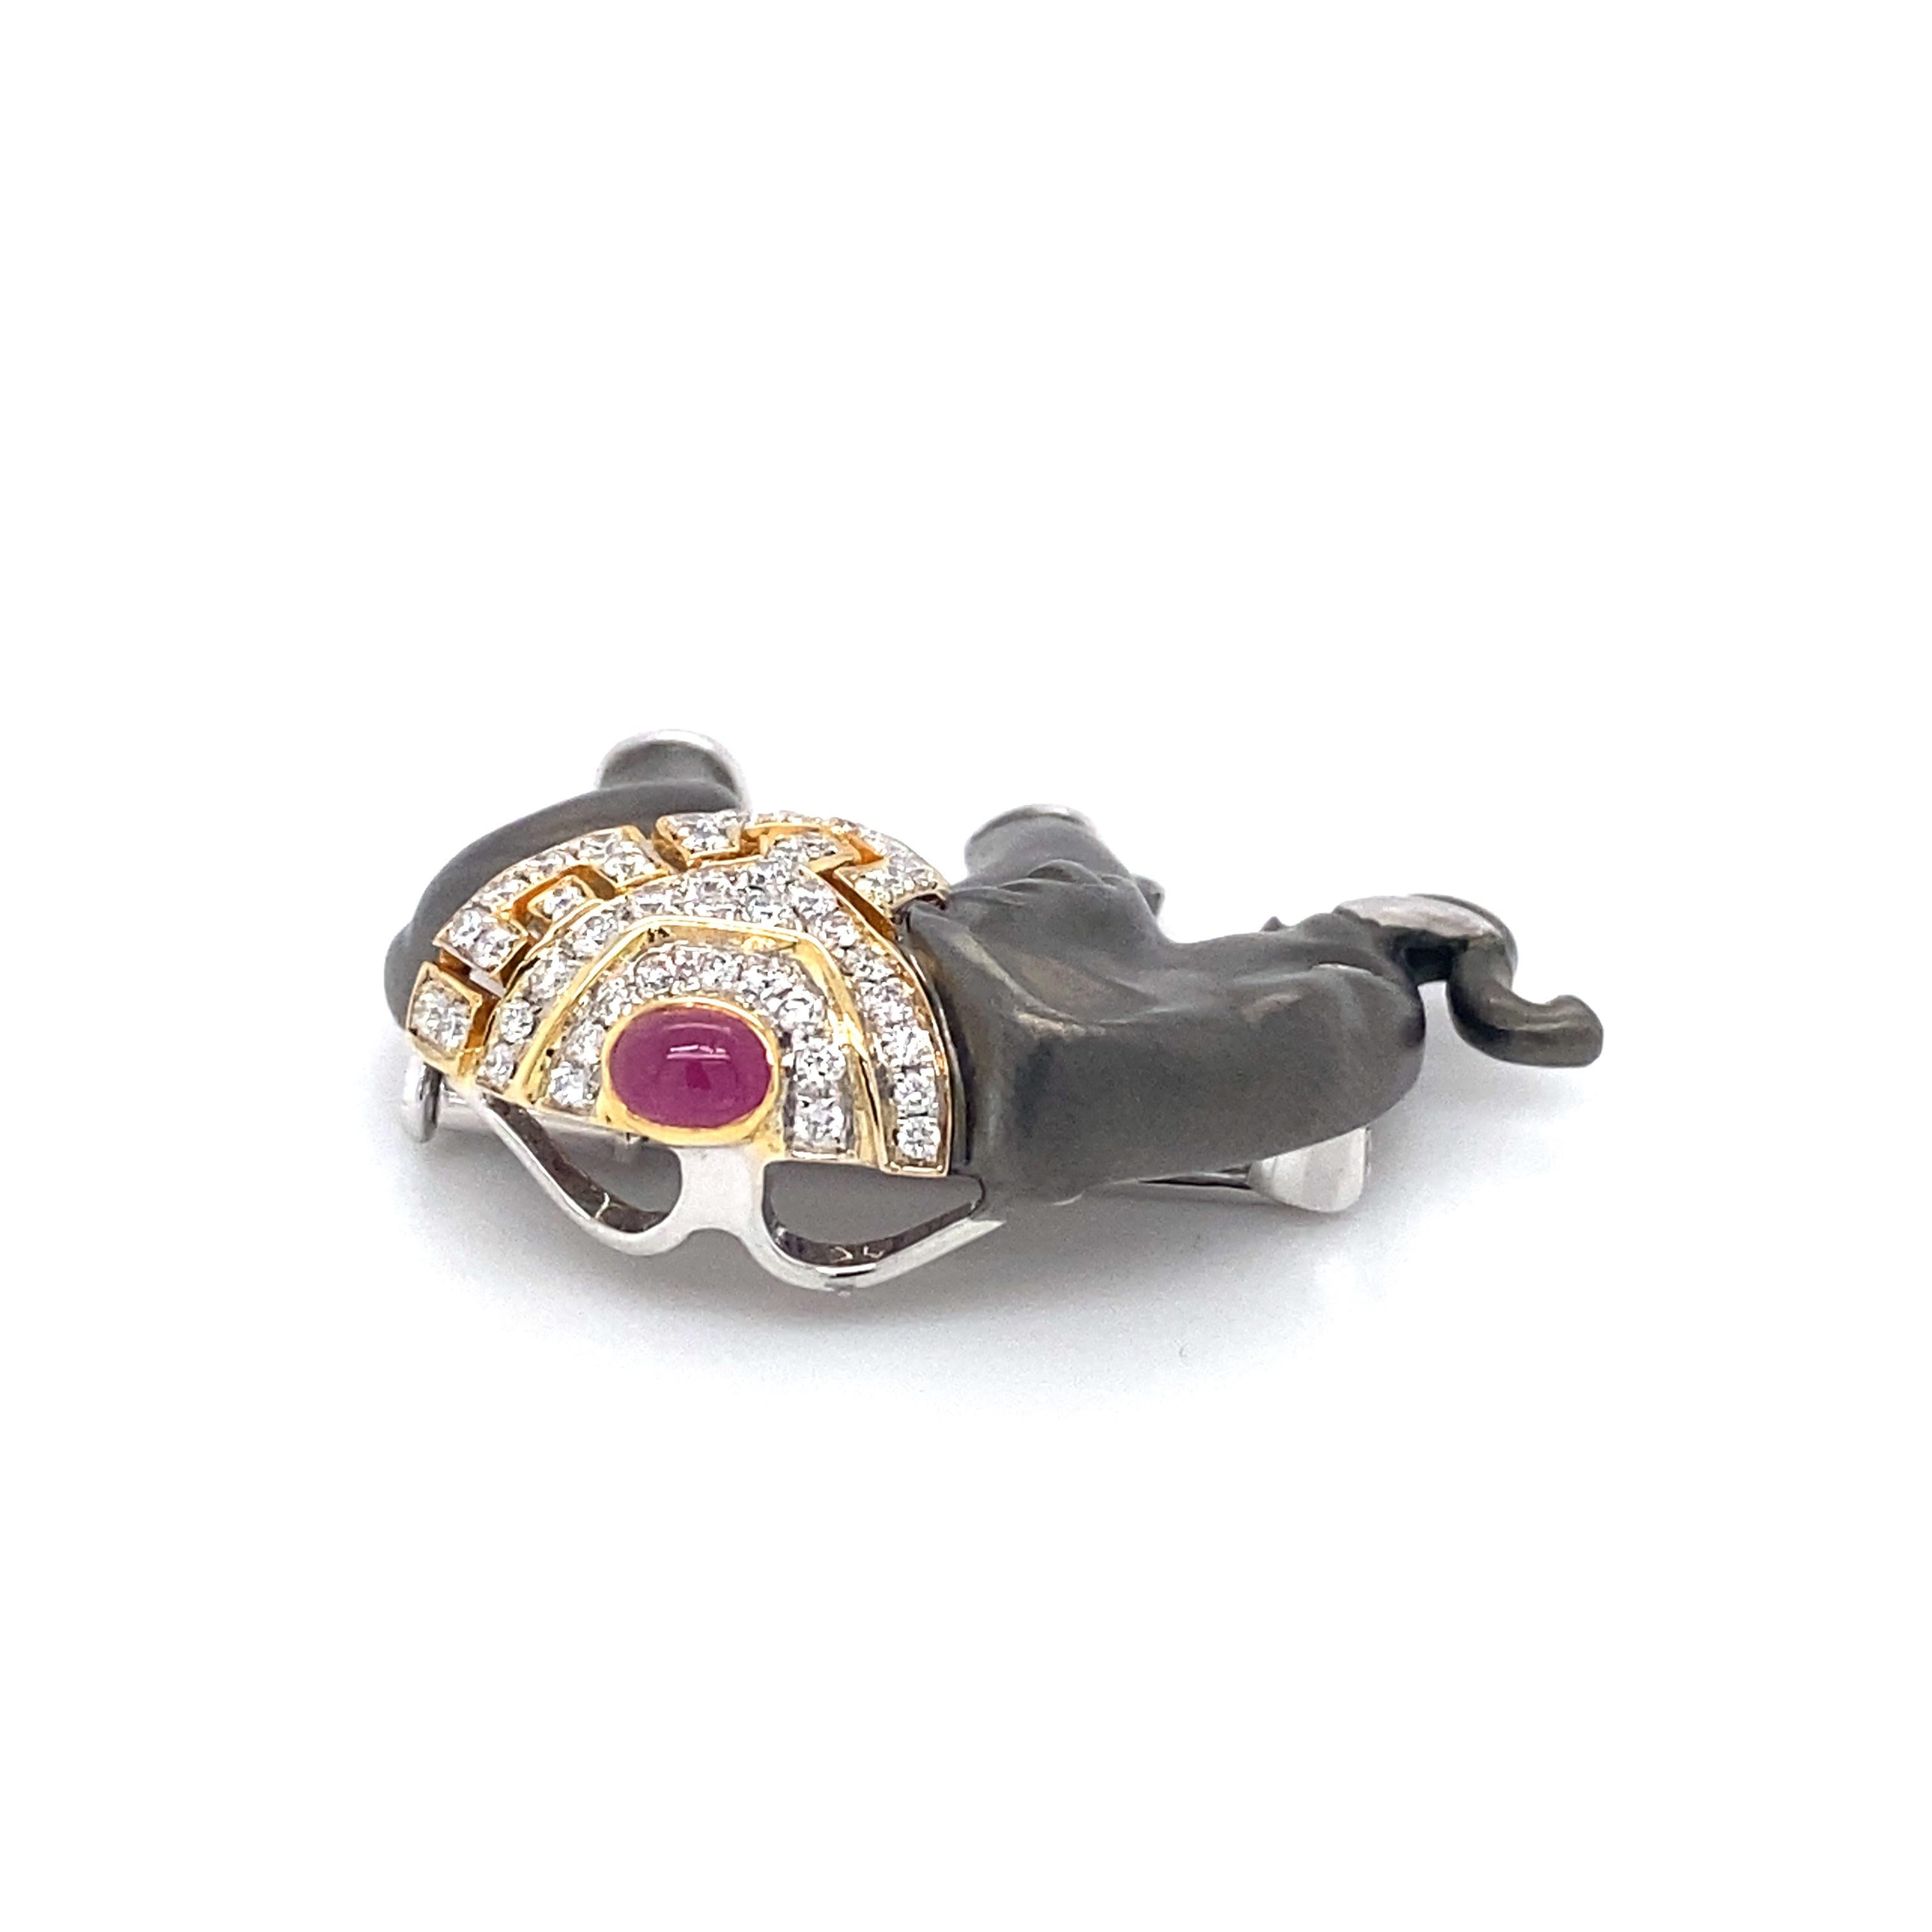 Item Details: This elegant and unique elephant brooch features a cabochon ruby and a tiny diamond eye.

Circa: 2000s
Metal Type: 18 karat white gold
Weight: 10.8 grams

Diamond Details:

Carat: 0.40 carat total weight
Shape: Round and